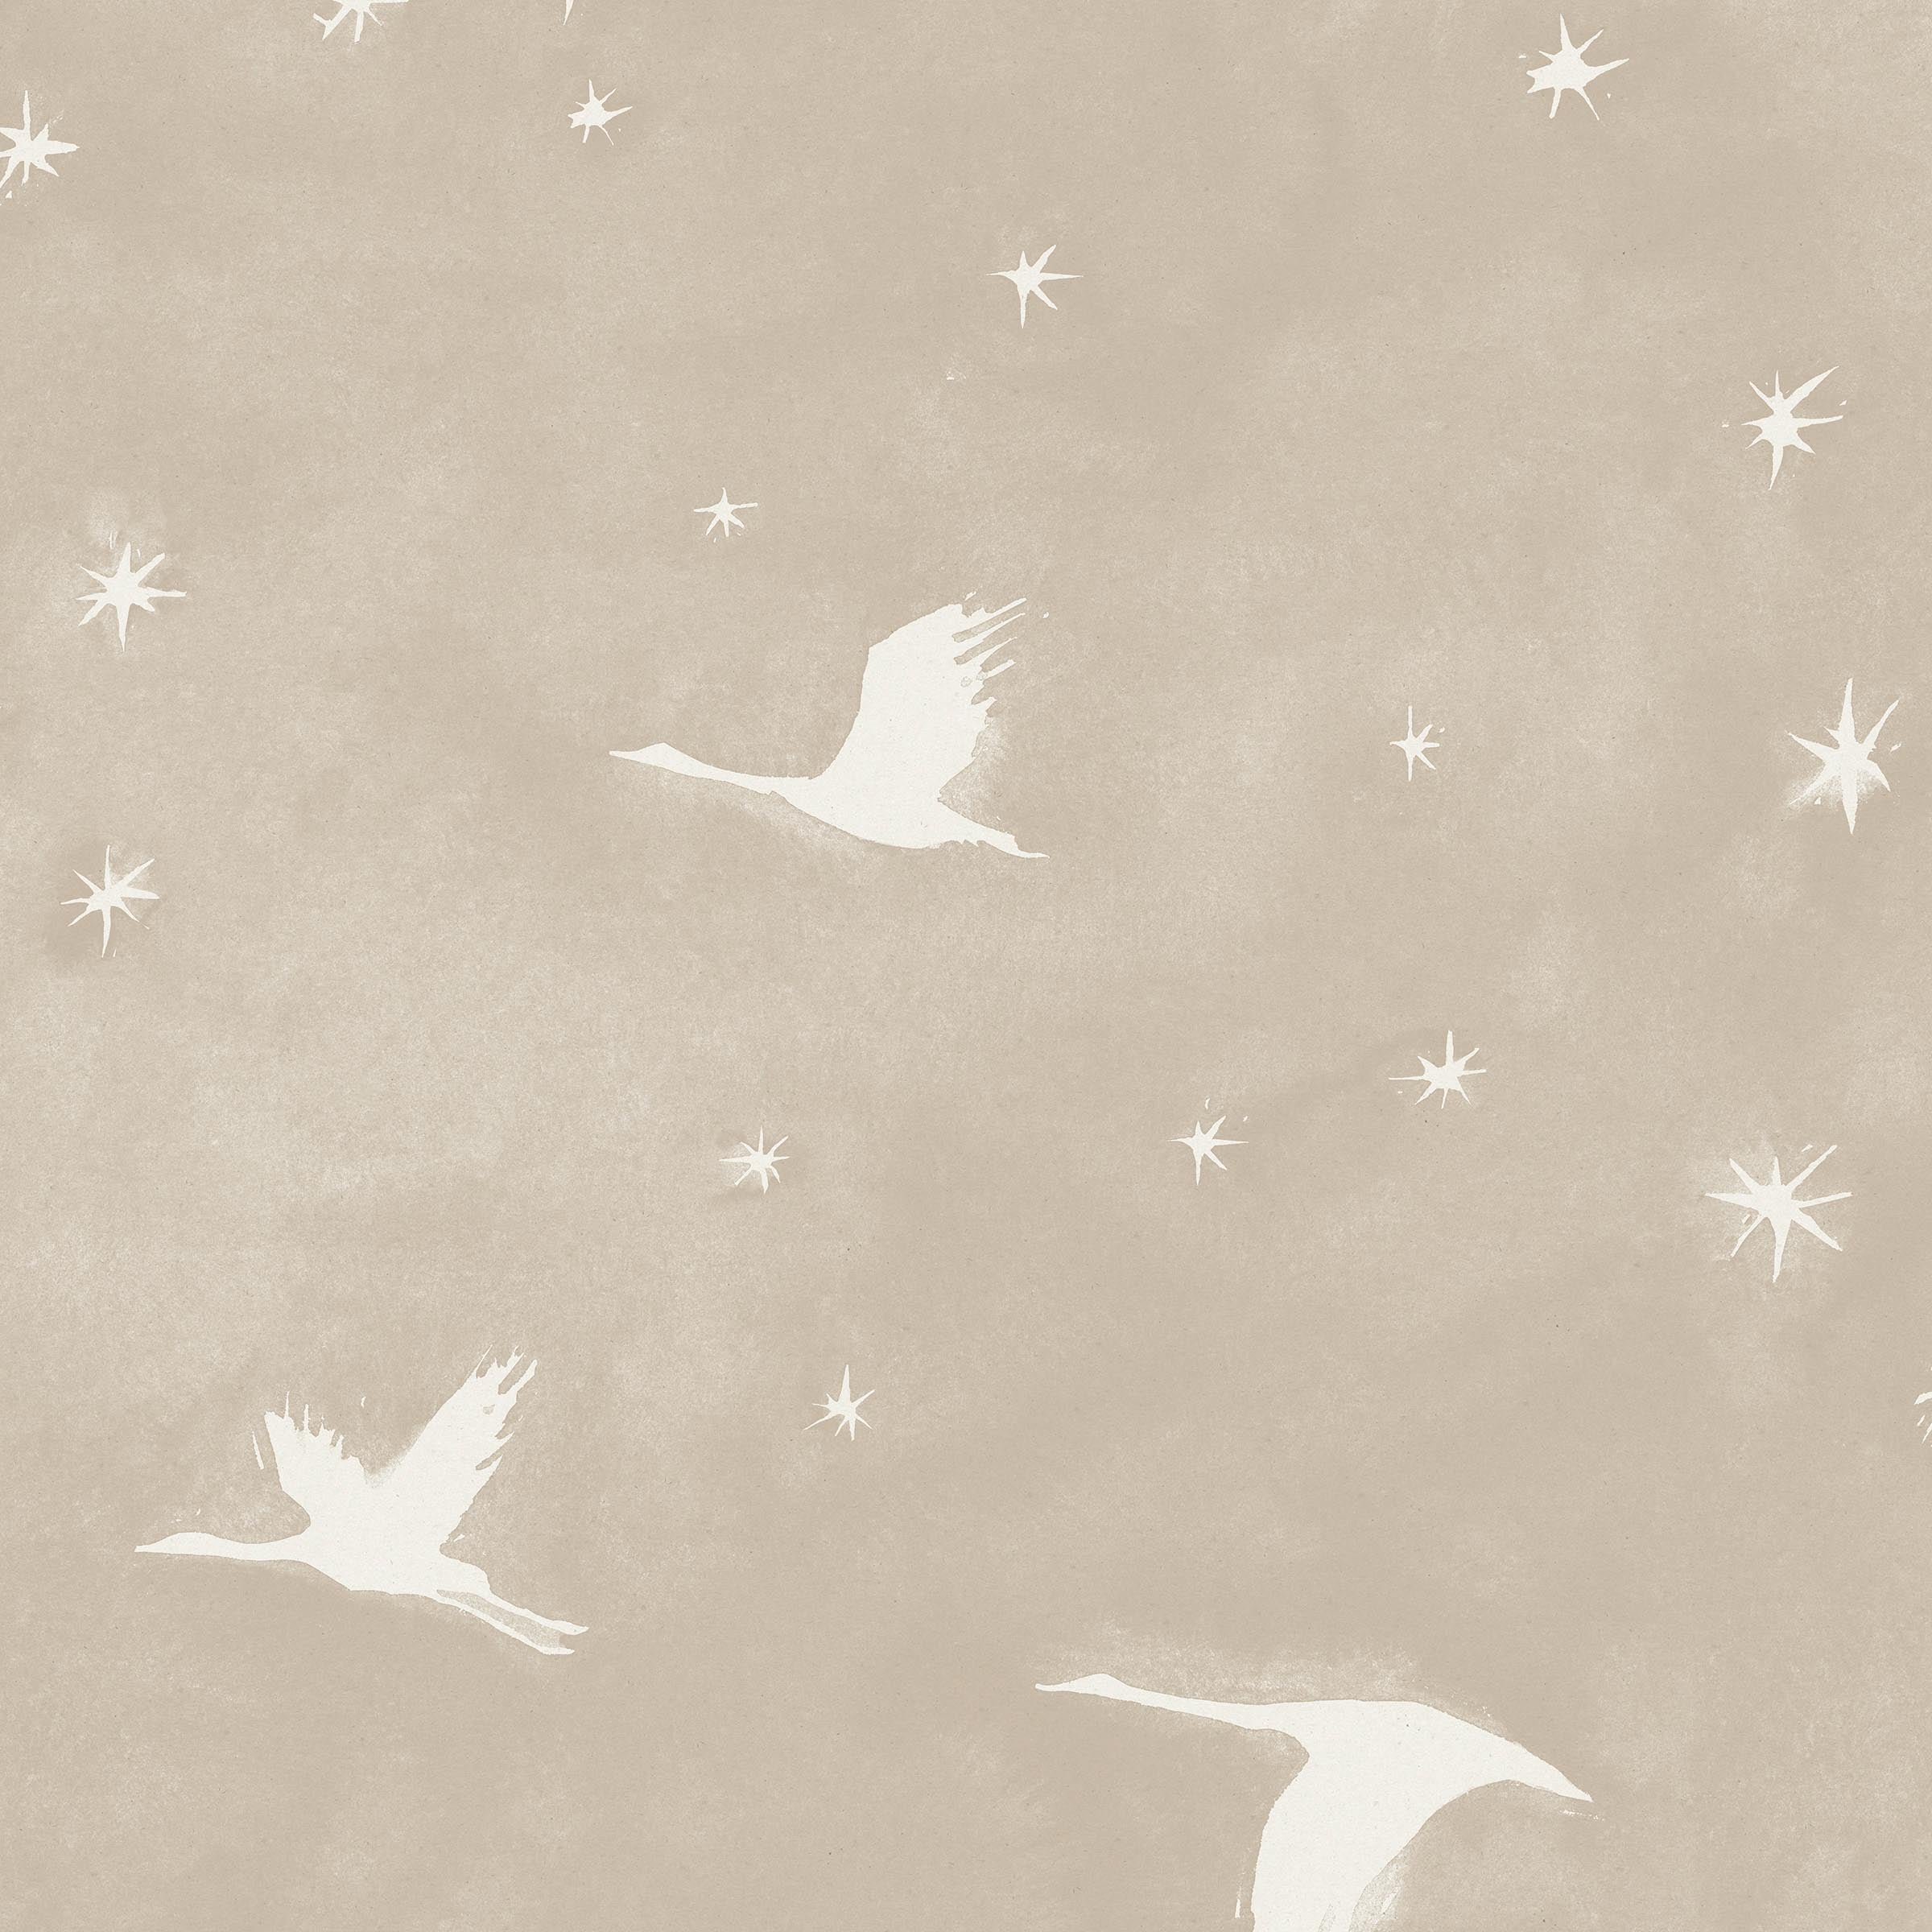 Detail of wallpaper in a repeating print of birds and stars in white on a tan watercolor field.